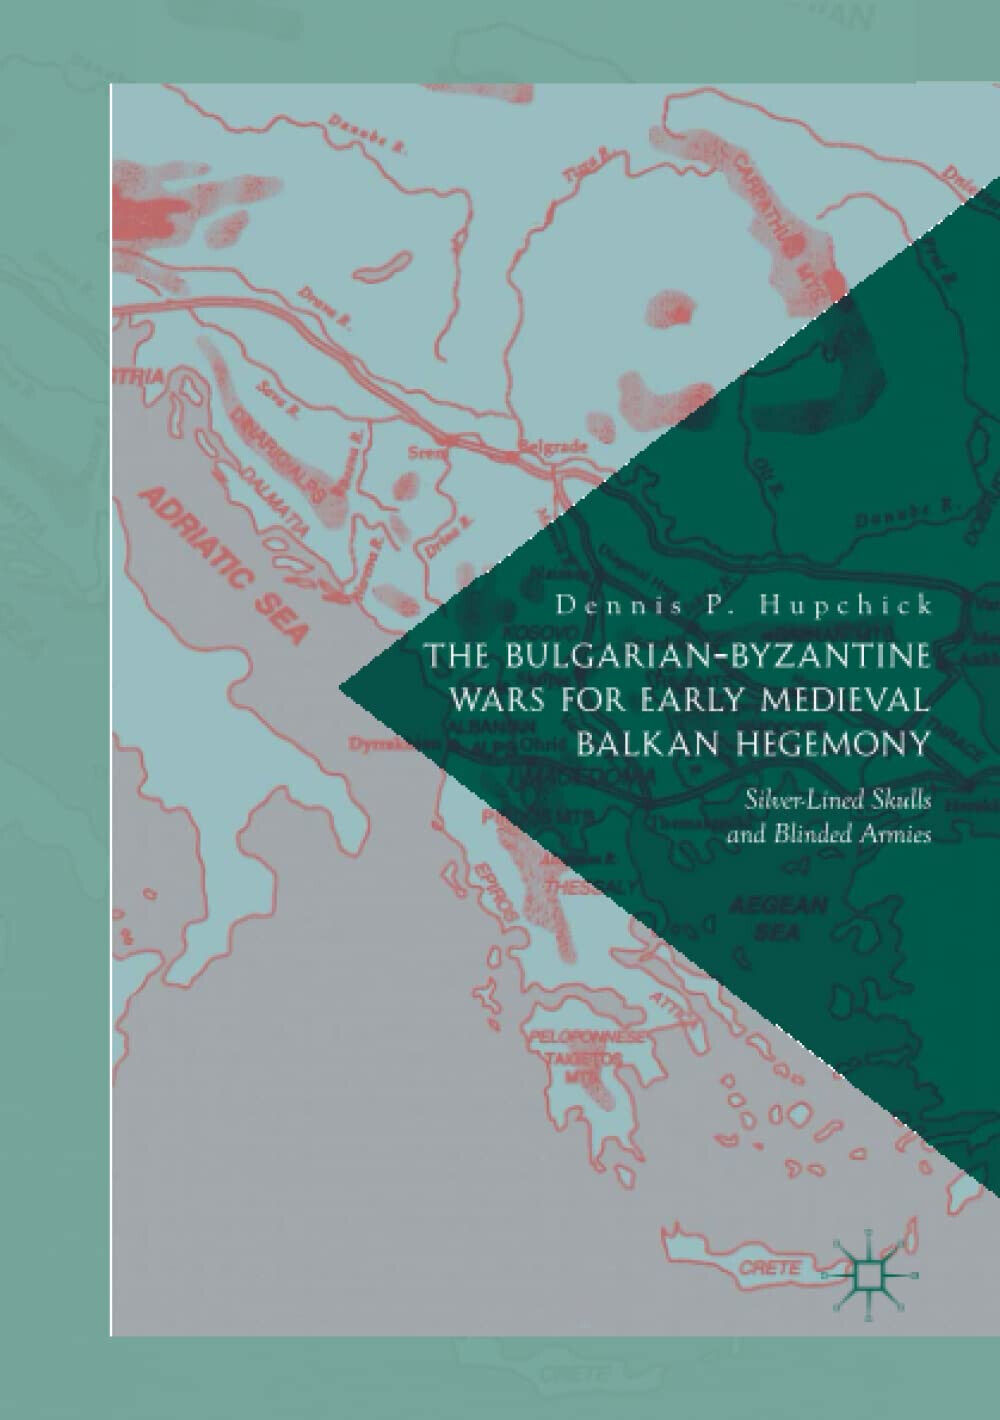 The Bulgarian-Byzantine Wars for Early Medieval Balkan Hegemony - Palgrave, 2017